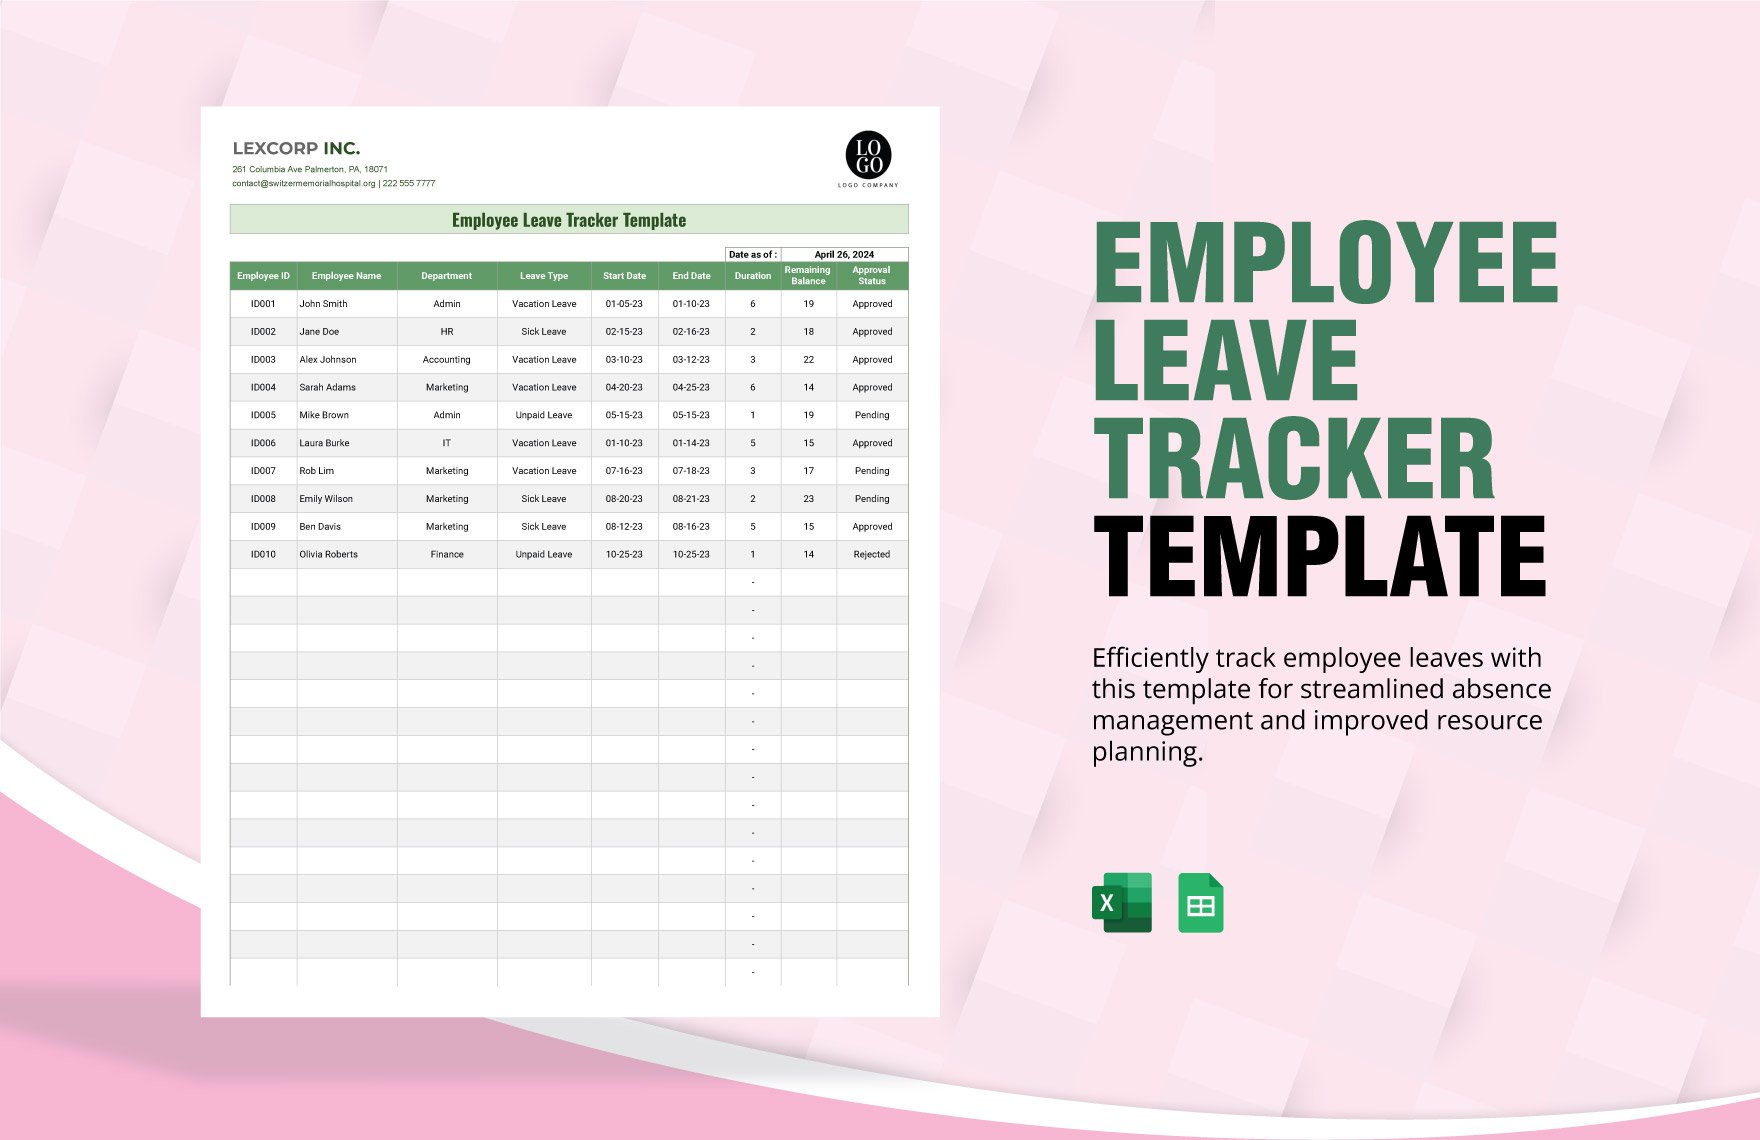 Employee Leave Tracker Template in Excel, Google Sheets